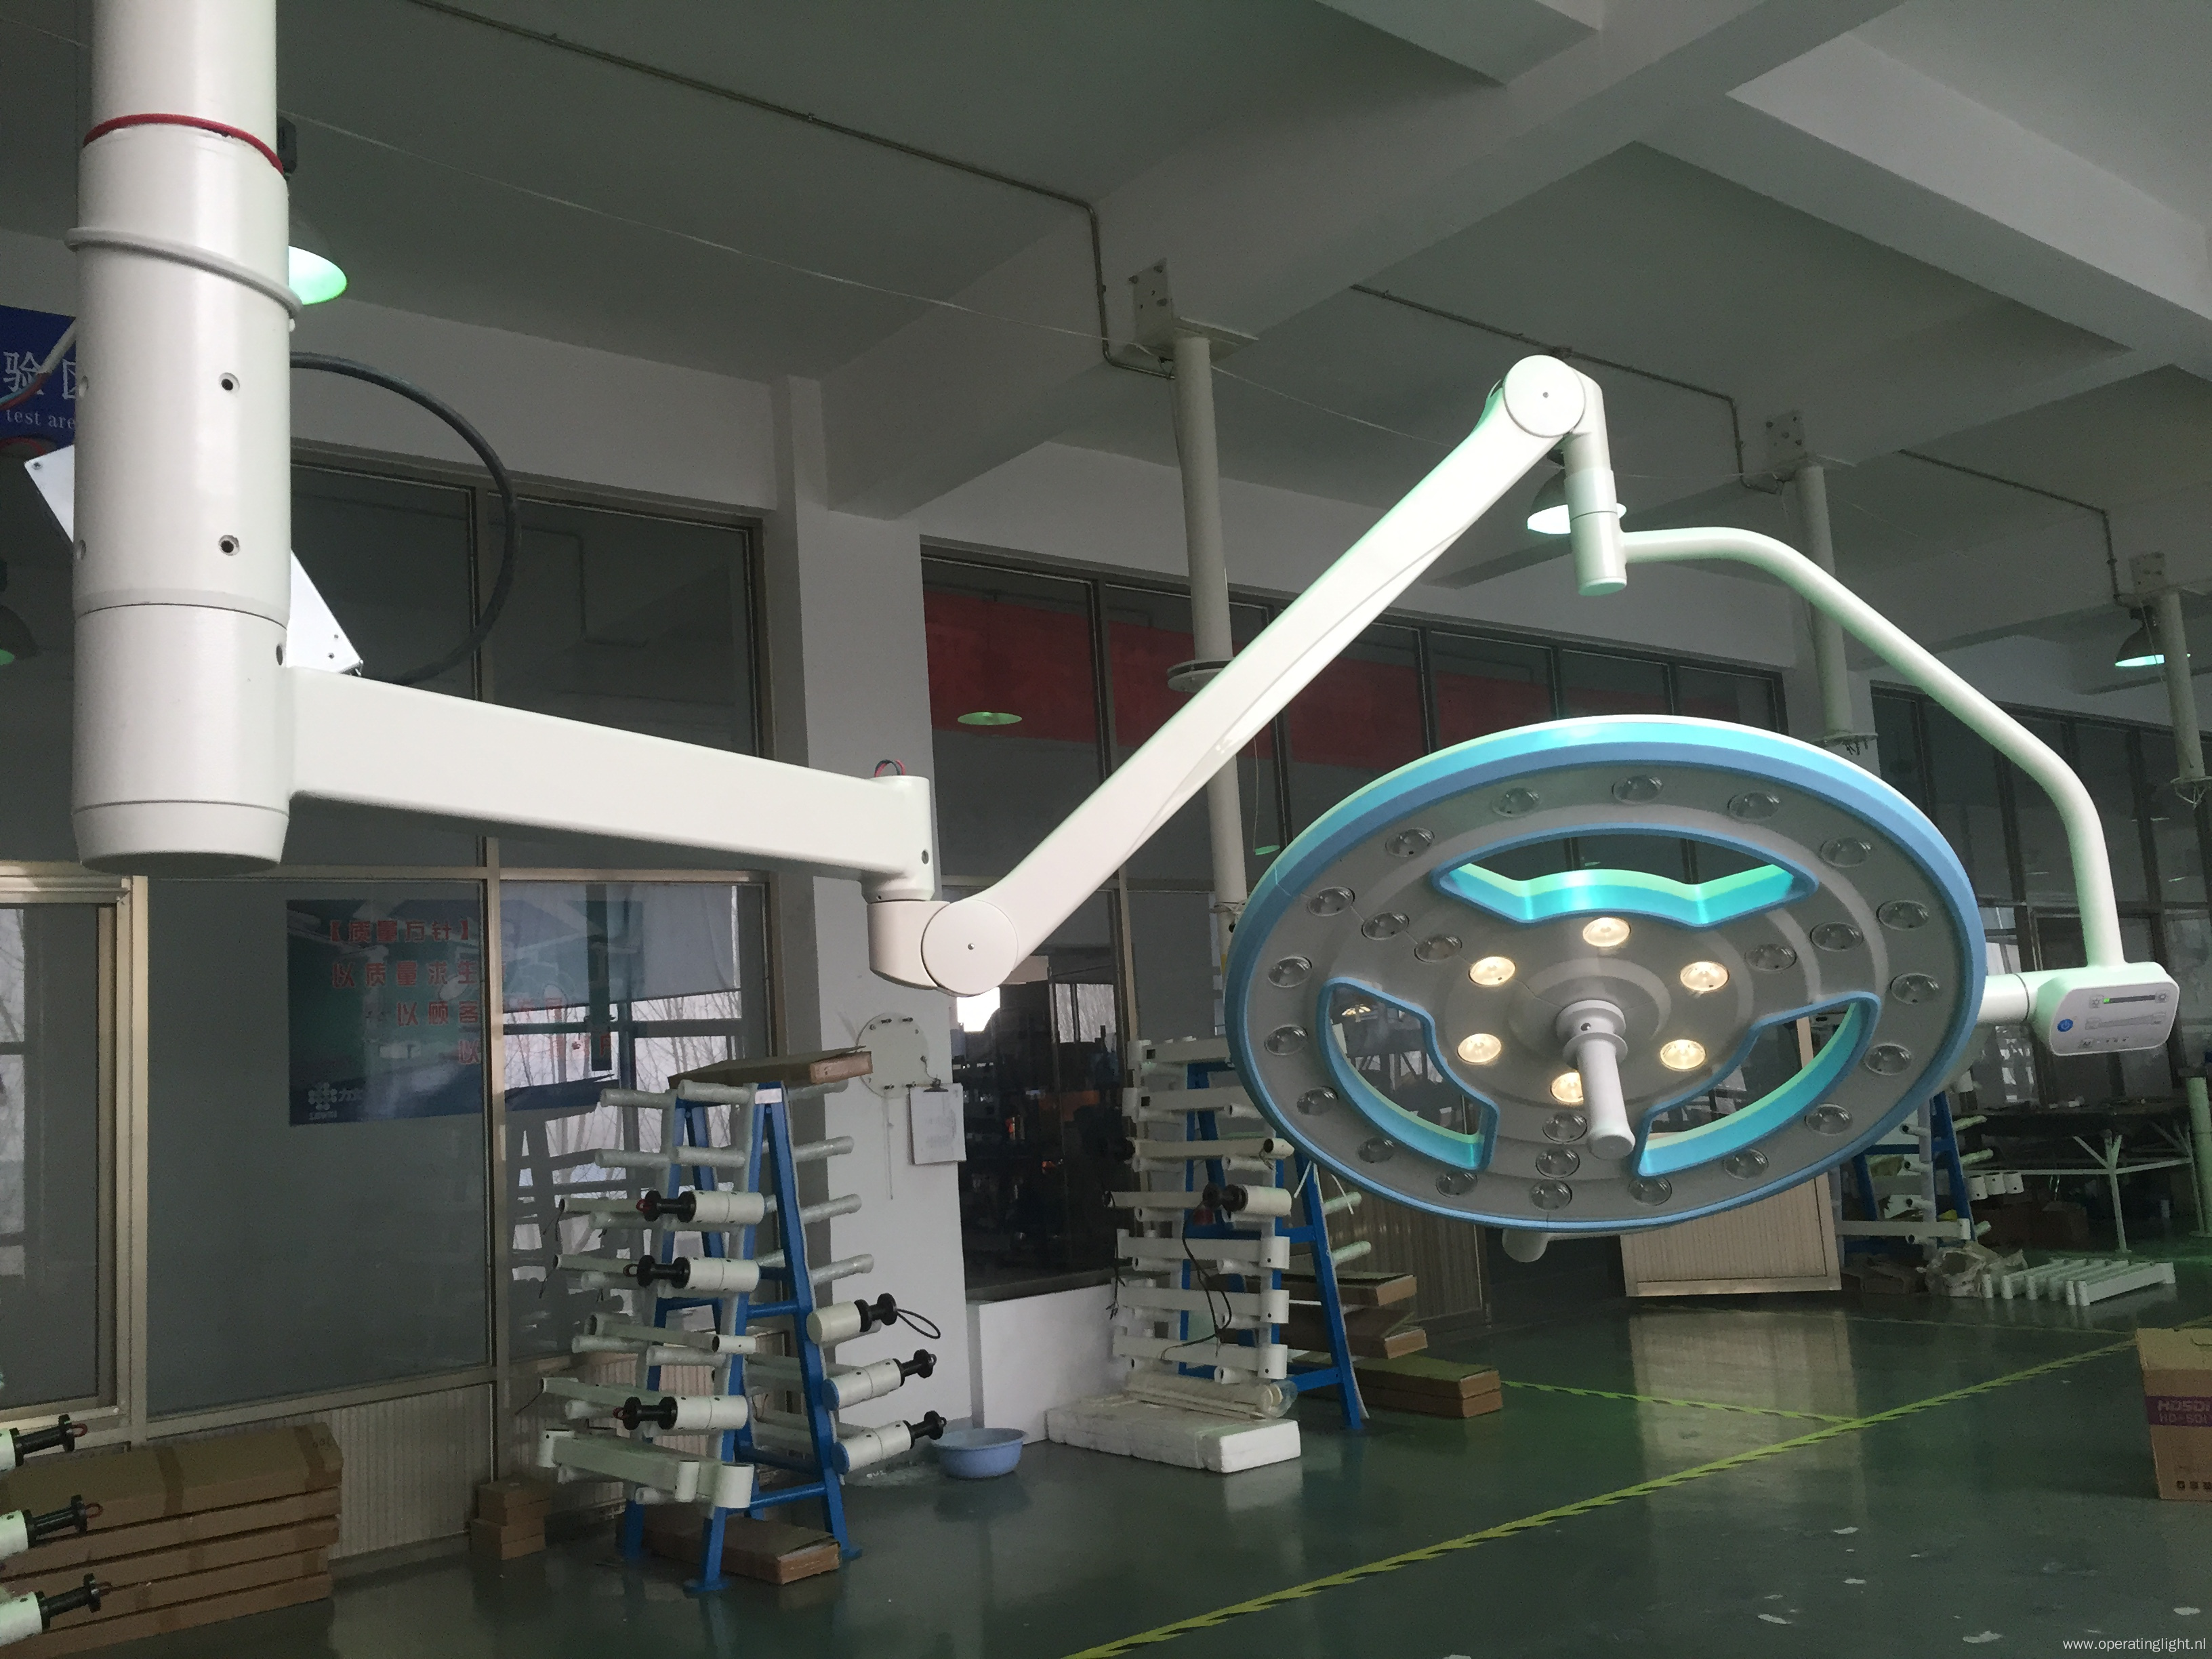 OR room surgical equipment led operation lamp